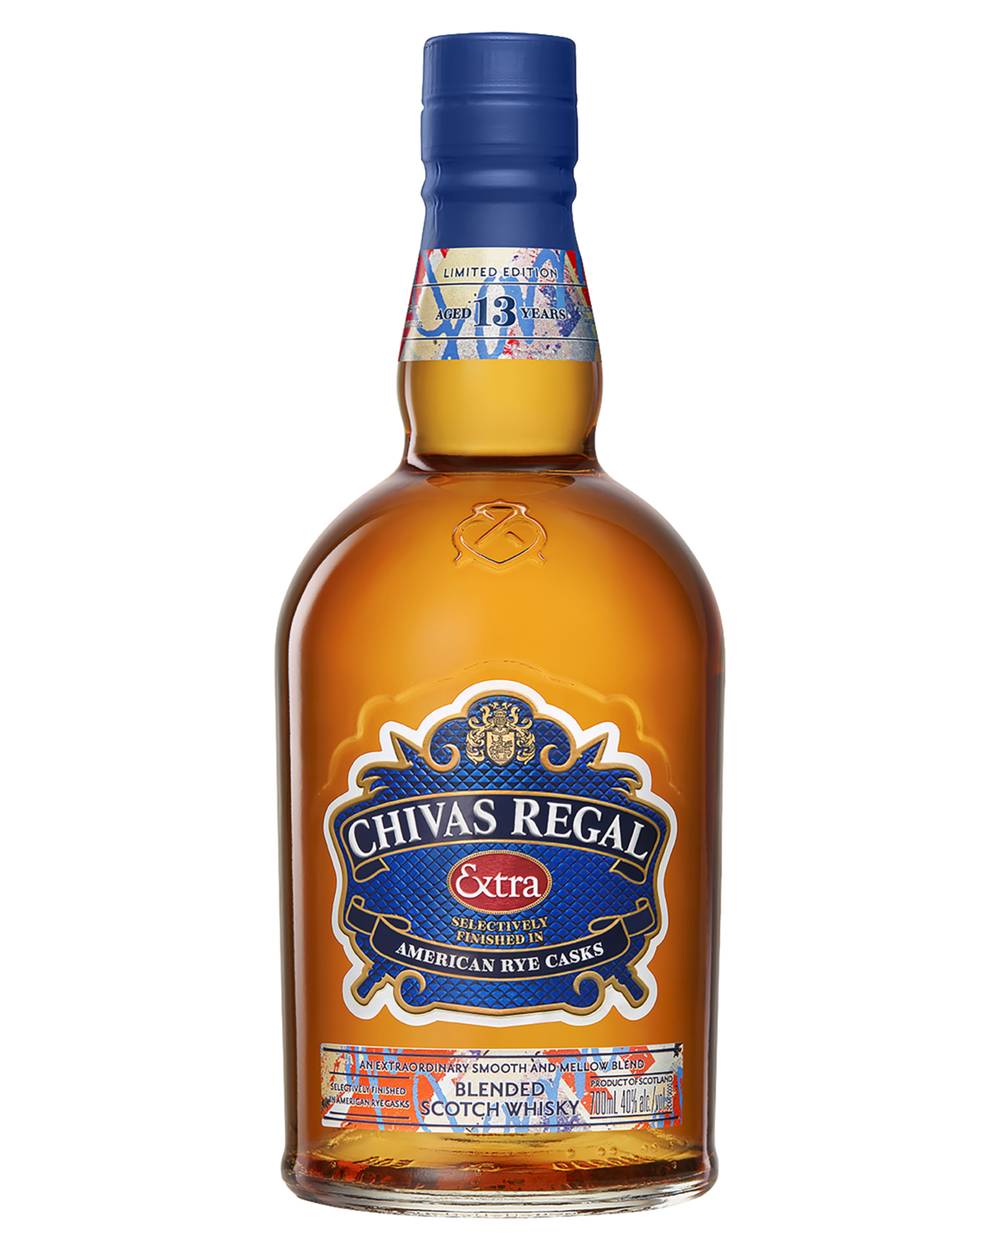 Chivas Regal 13 Year Old American Rye Cask Blended Scotch Whisky 700mL